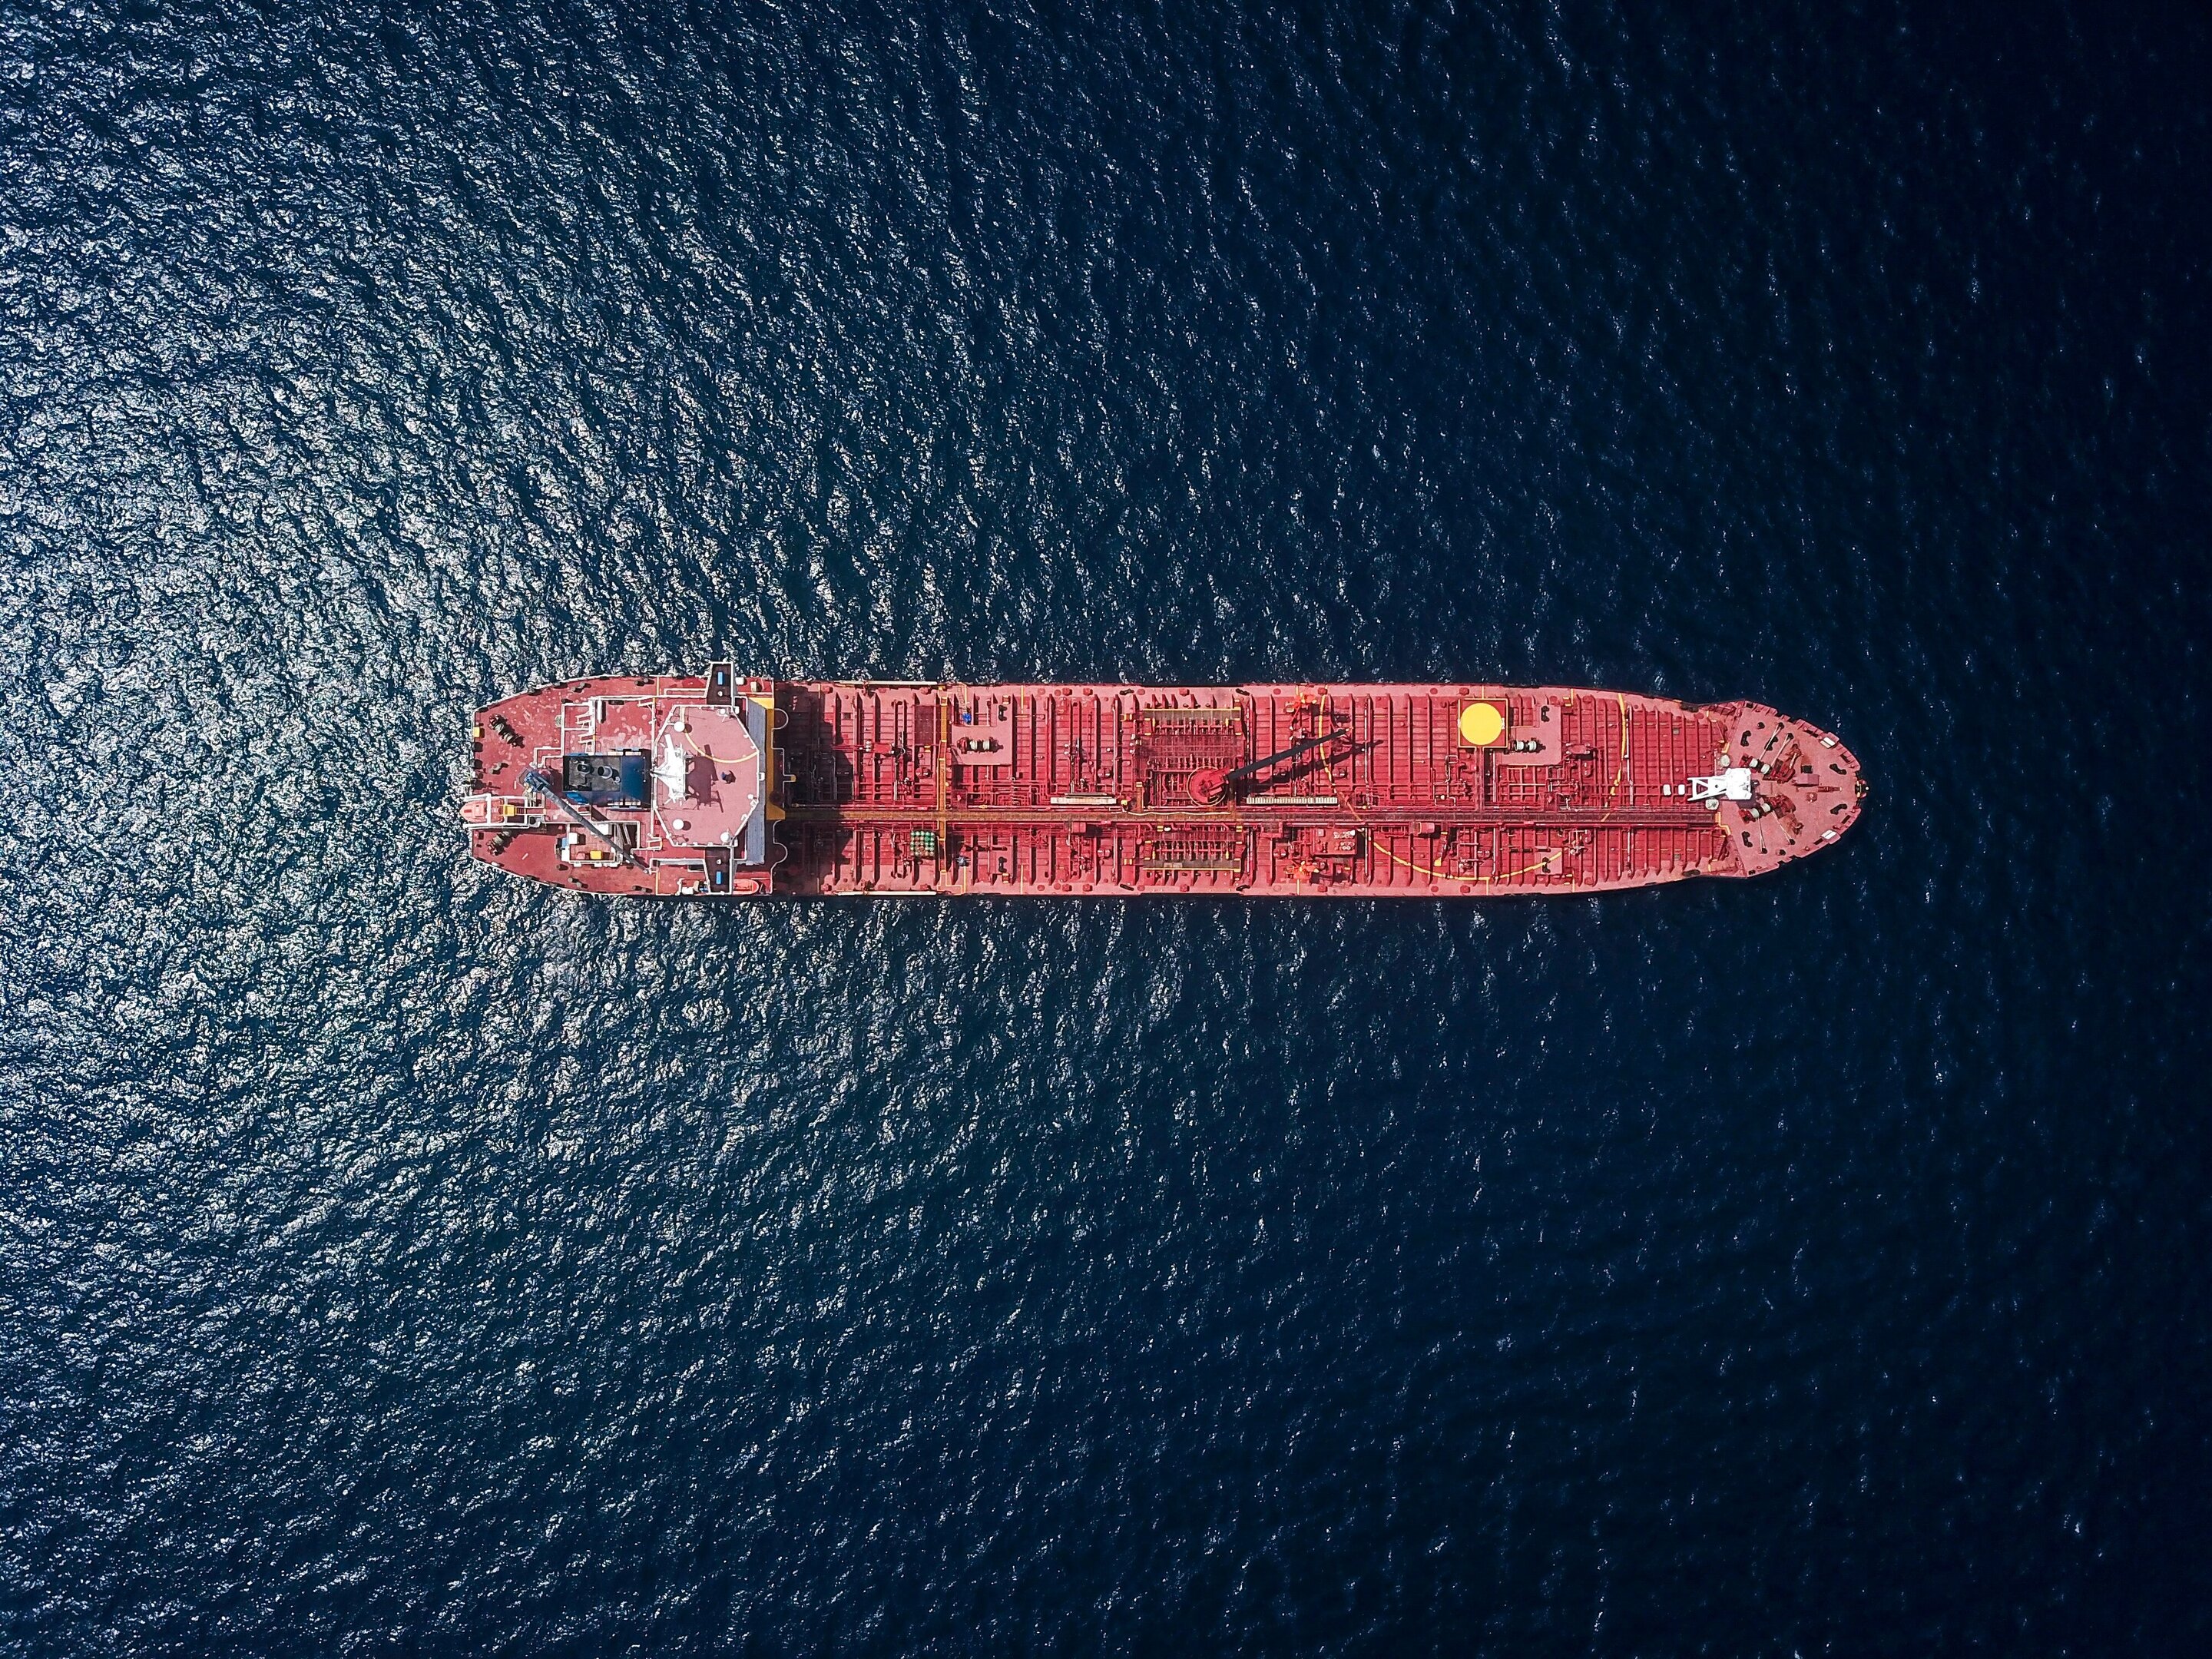 New efficient ships won't be enough to curb shipping sector's environmental damage